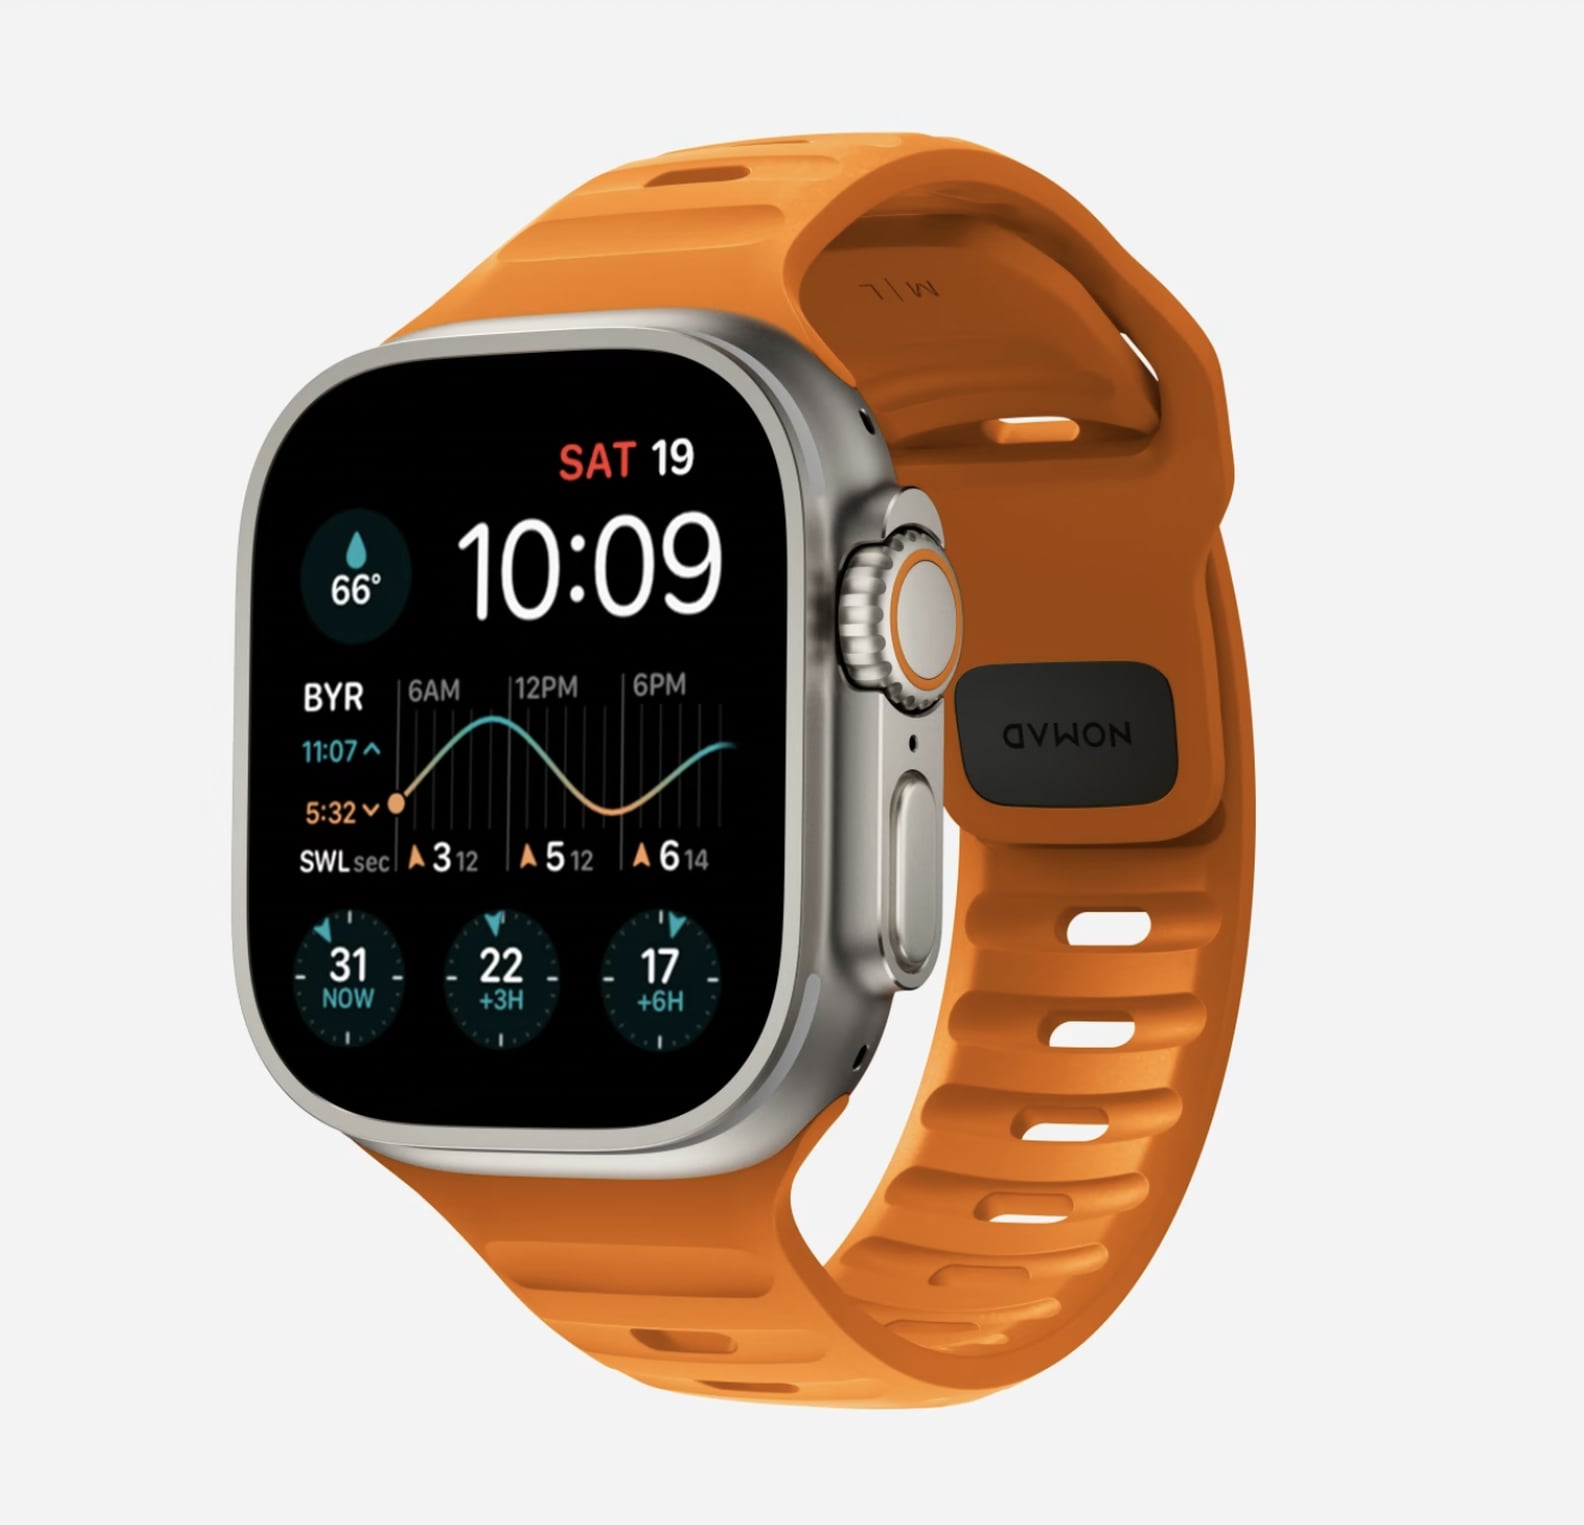 10 Best Apple Watch Bands For Working Out | POPSUGAR Fitness